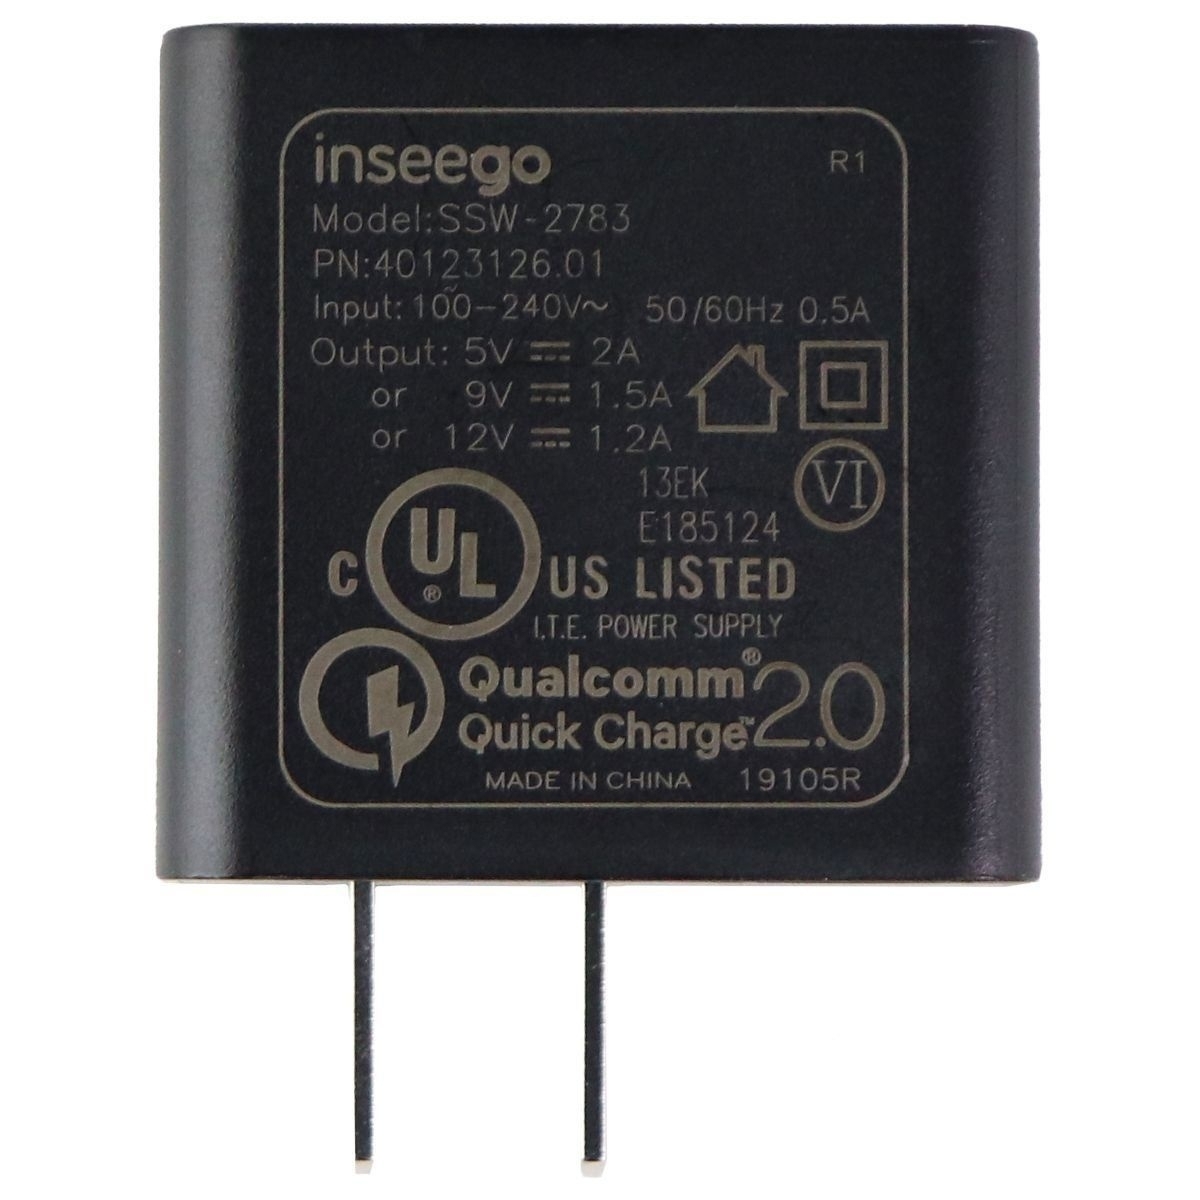 Inseego Qualcomm Quick Charge 2.0 Single USB Wall Charger - Black (SSW-2783)